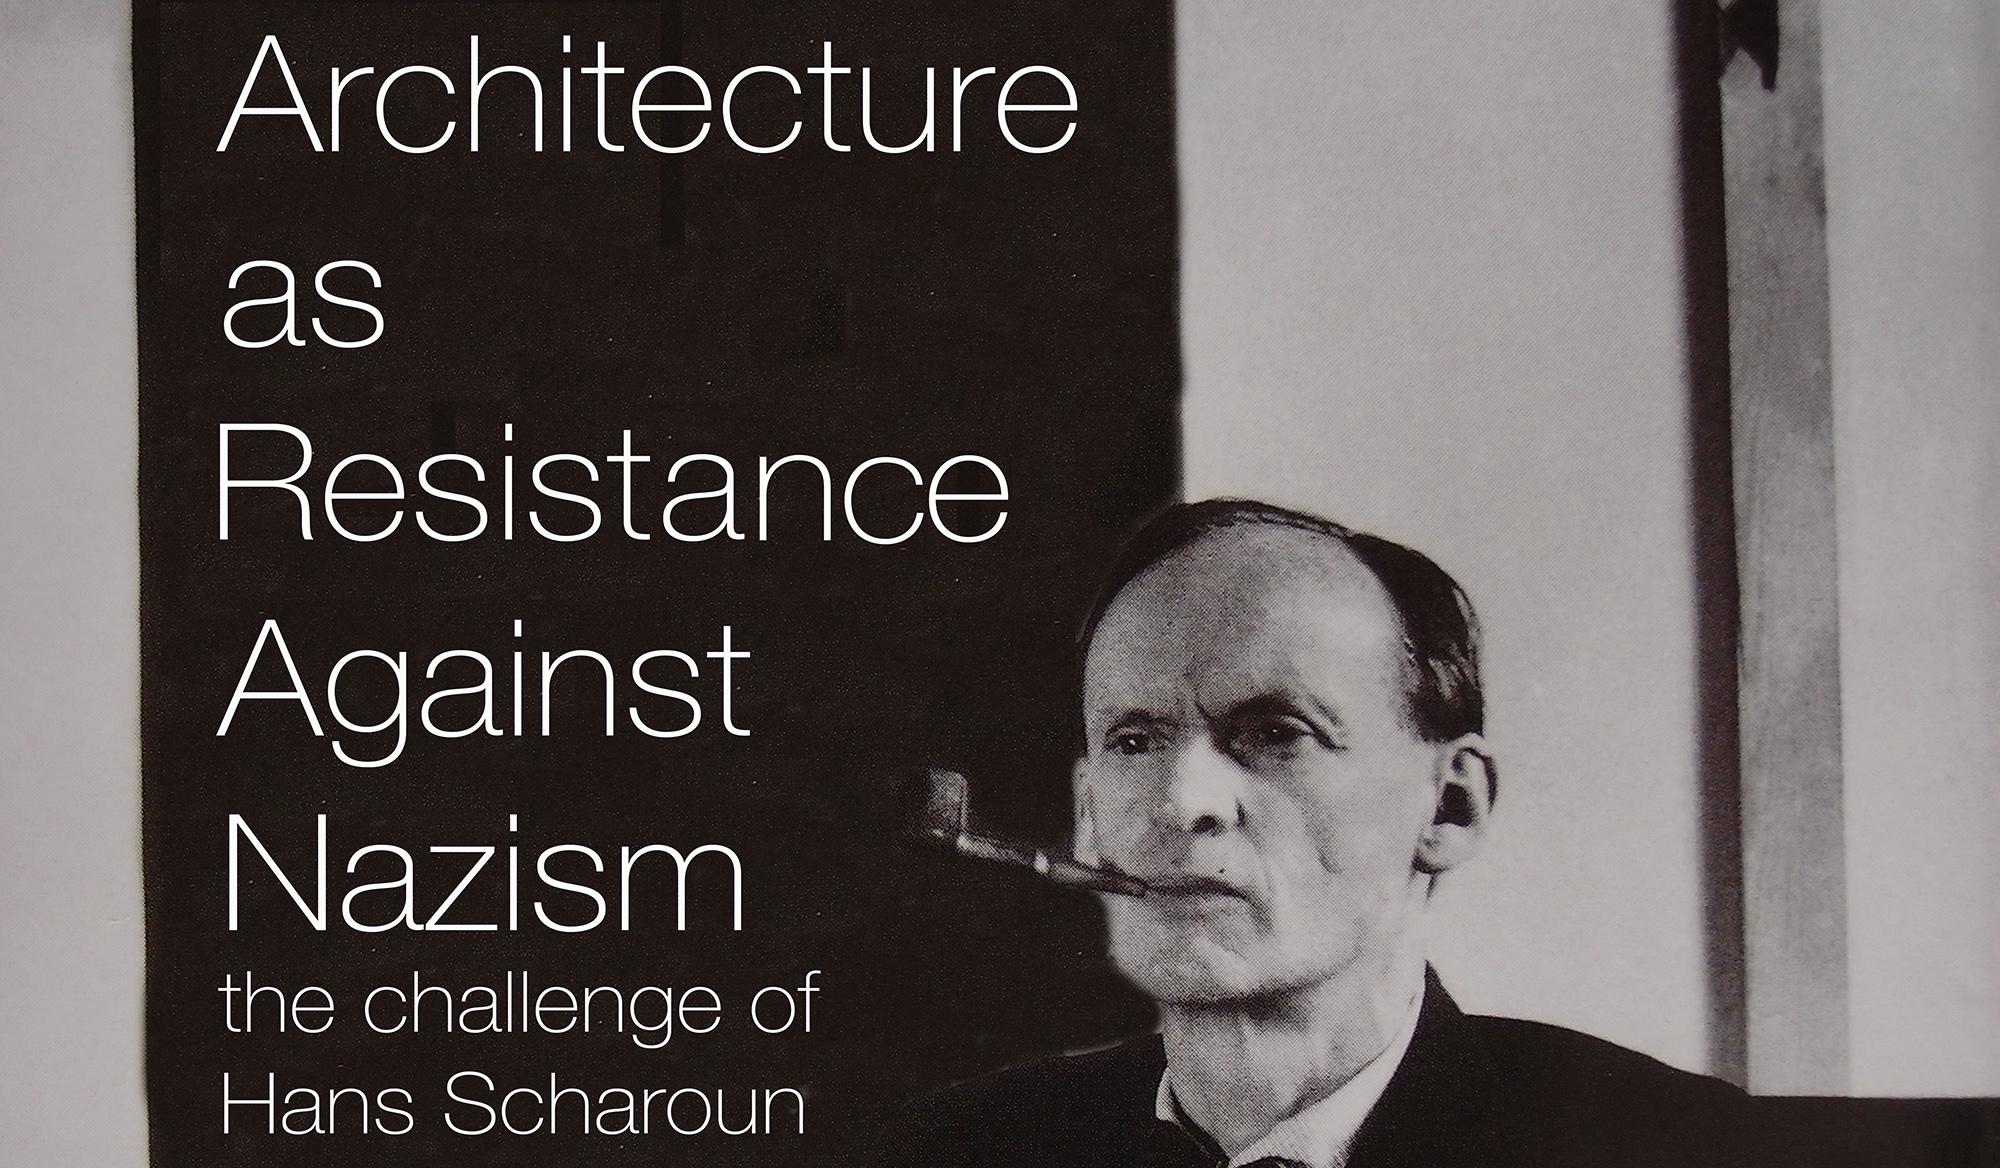 Architecture as resistance against Nazism: The challenge of Hans Scharoun